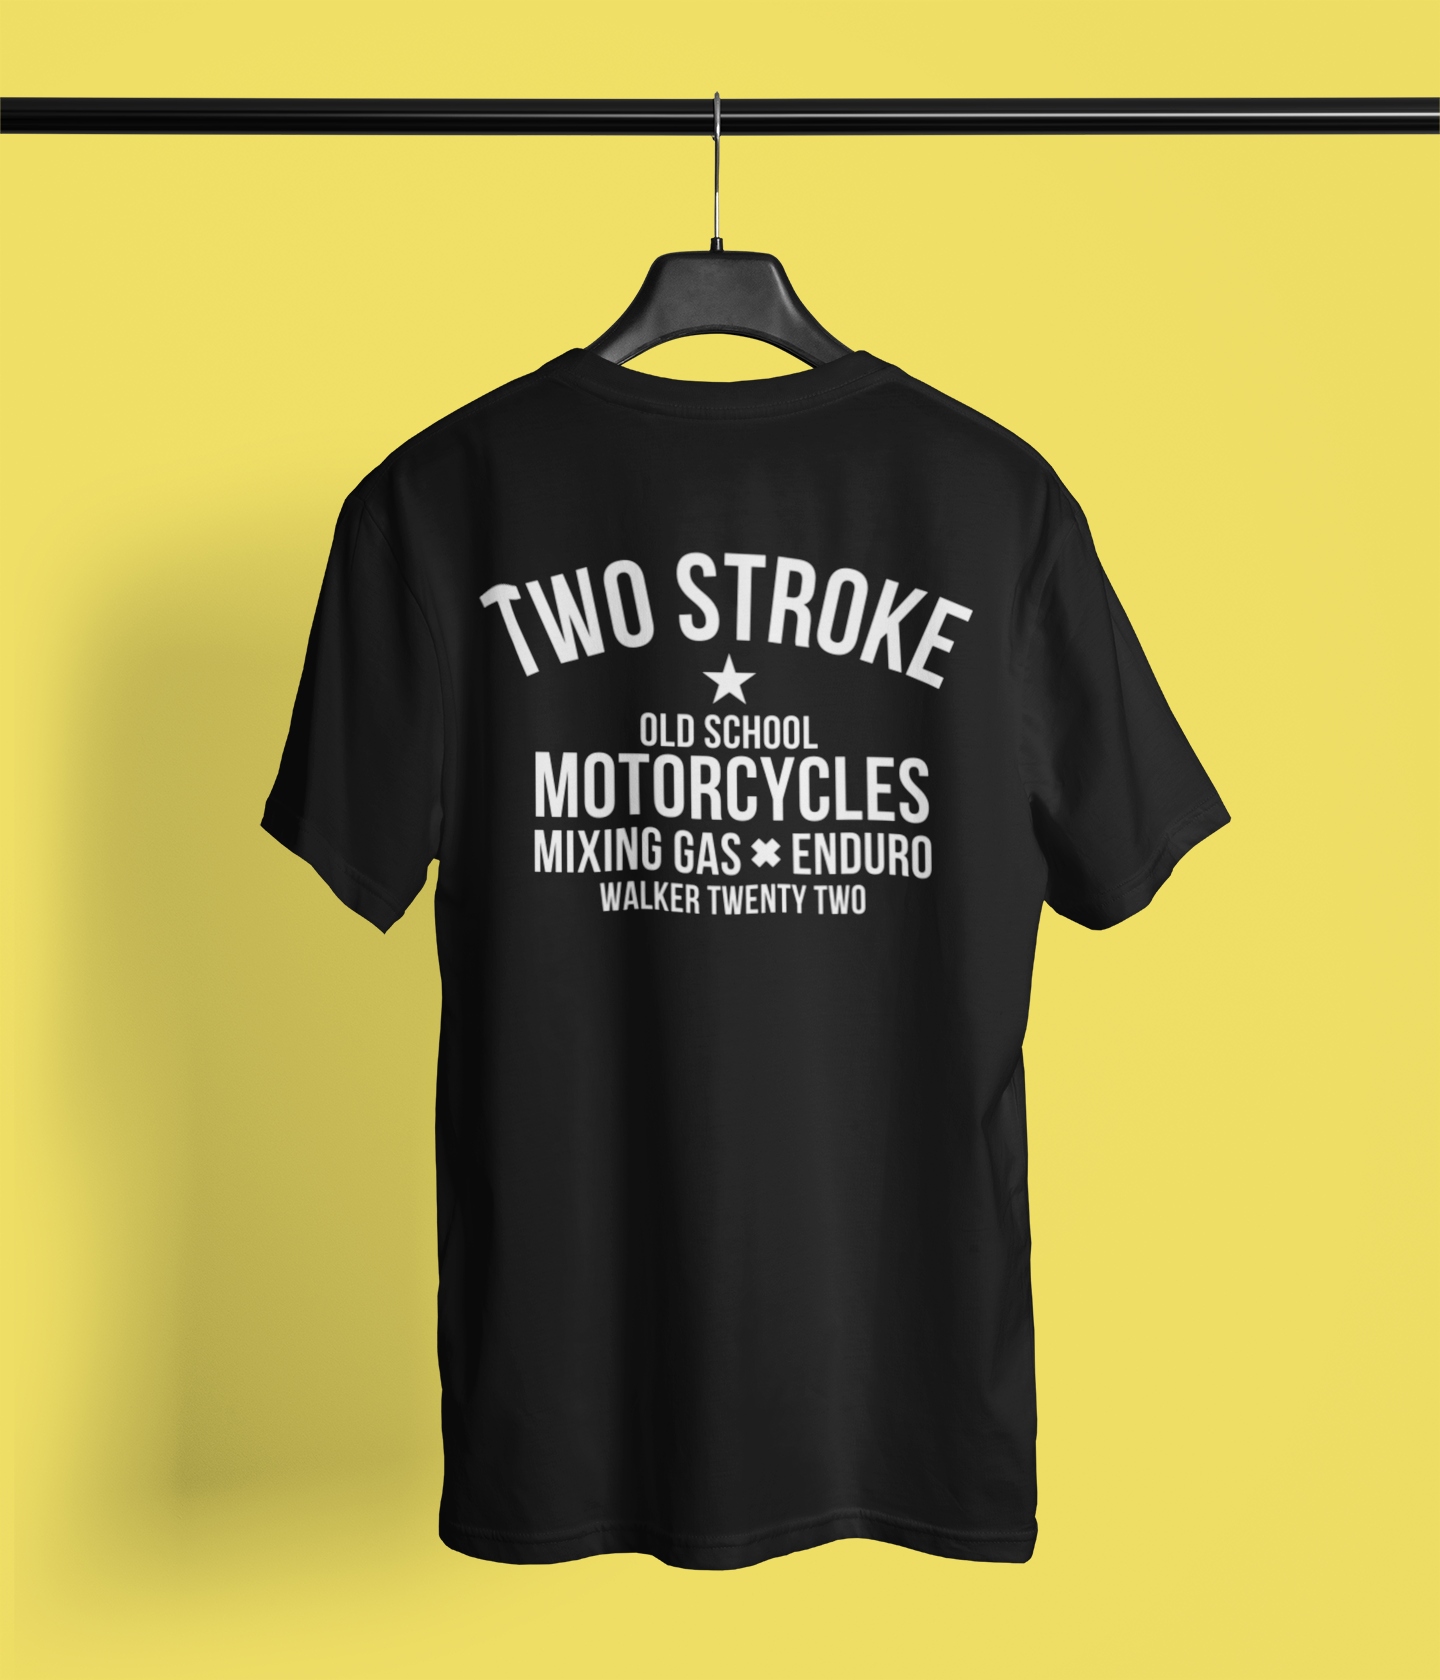 Two Stroke Motorcycles Tee